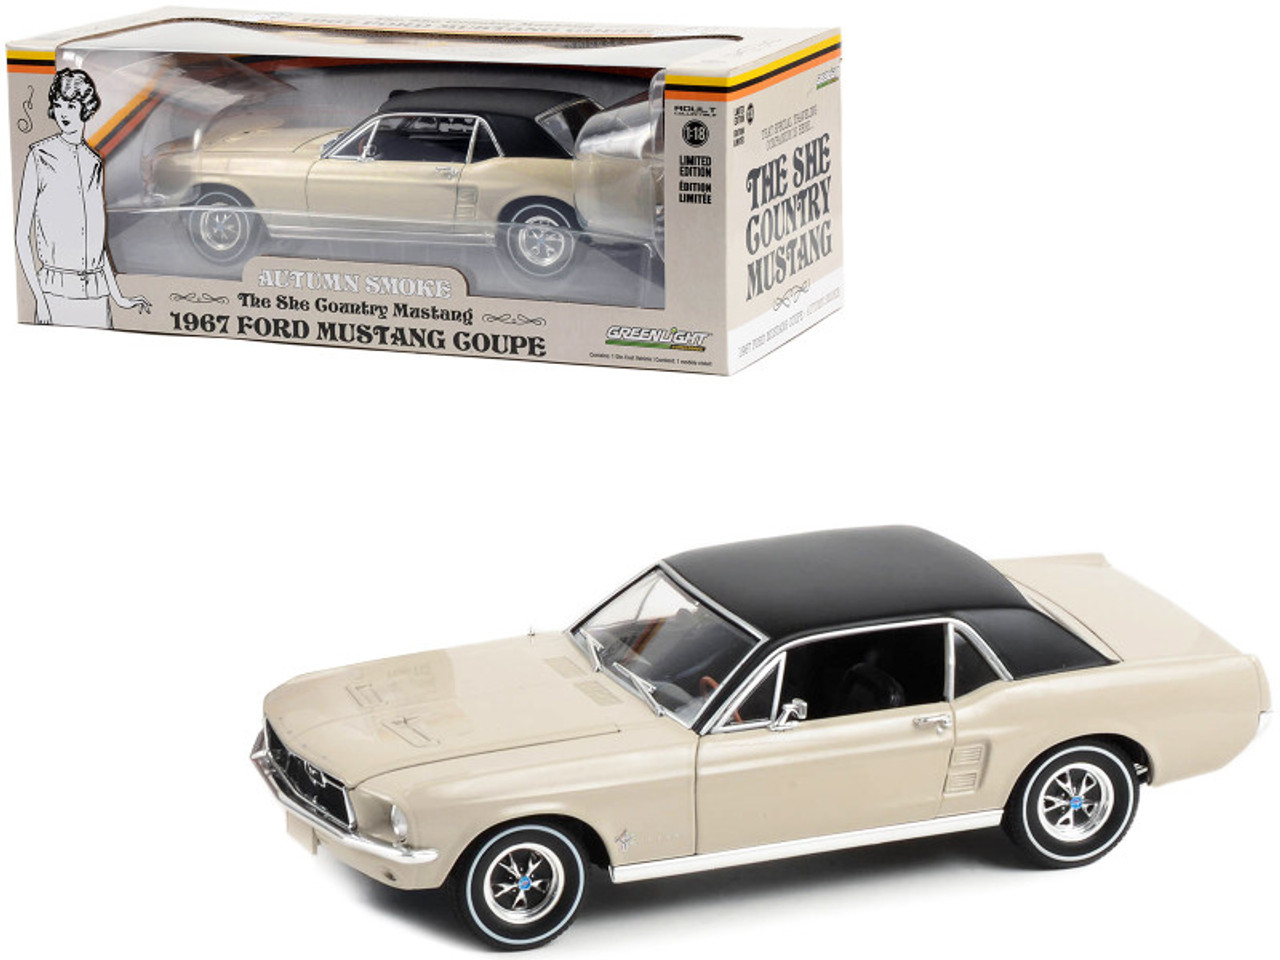 1/18 Greenlight 1967 Ford Mustang Coupe Autumn Smoke Beige with Black Vinyl Top "She Country Special - Bill Goodro Ford Denver Colorado" Diecast Car Model